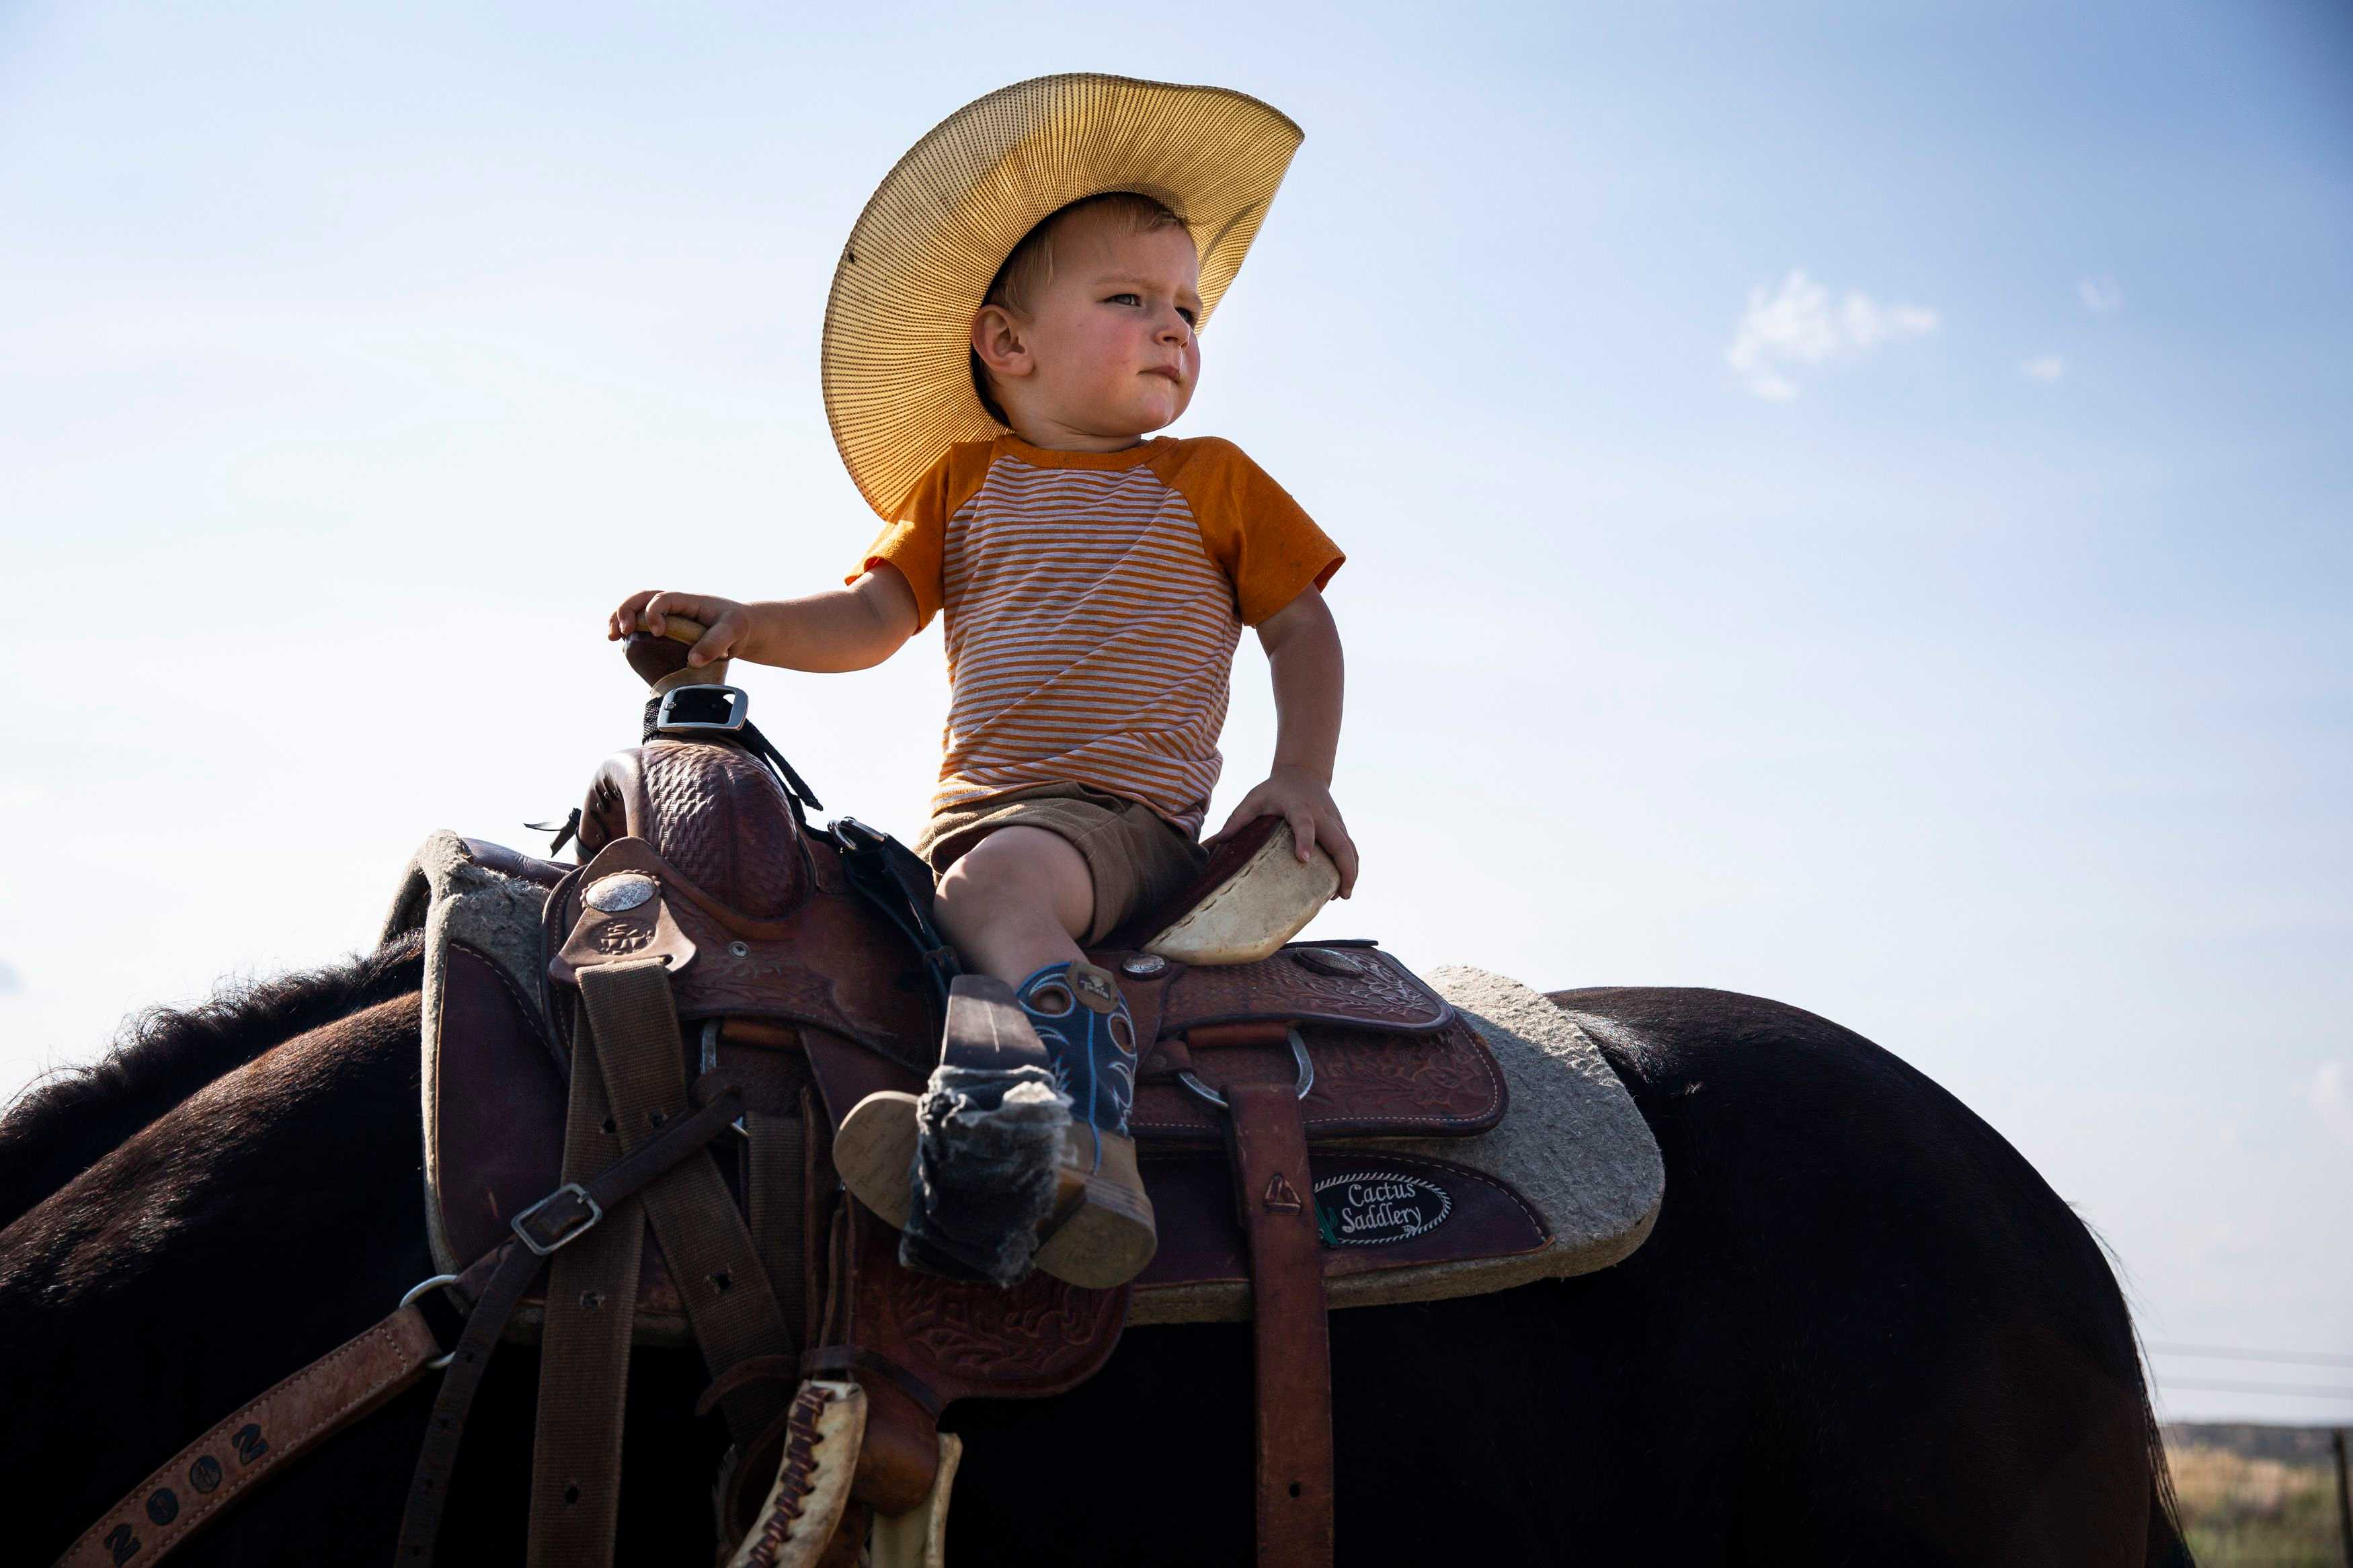 Beck Booze, 2, looked out across his grandparents' ranch while riding a horse in Miami, Texas.